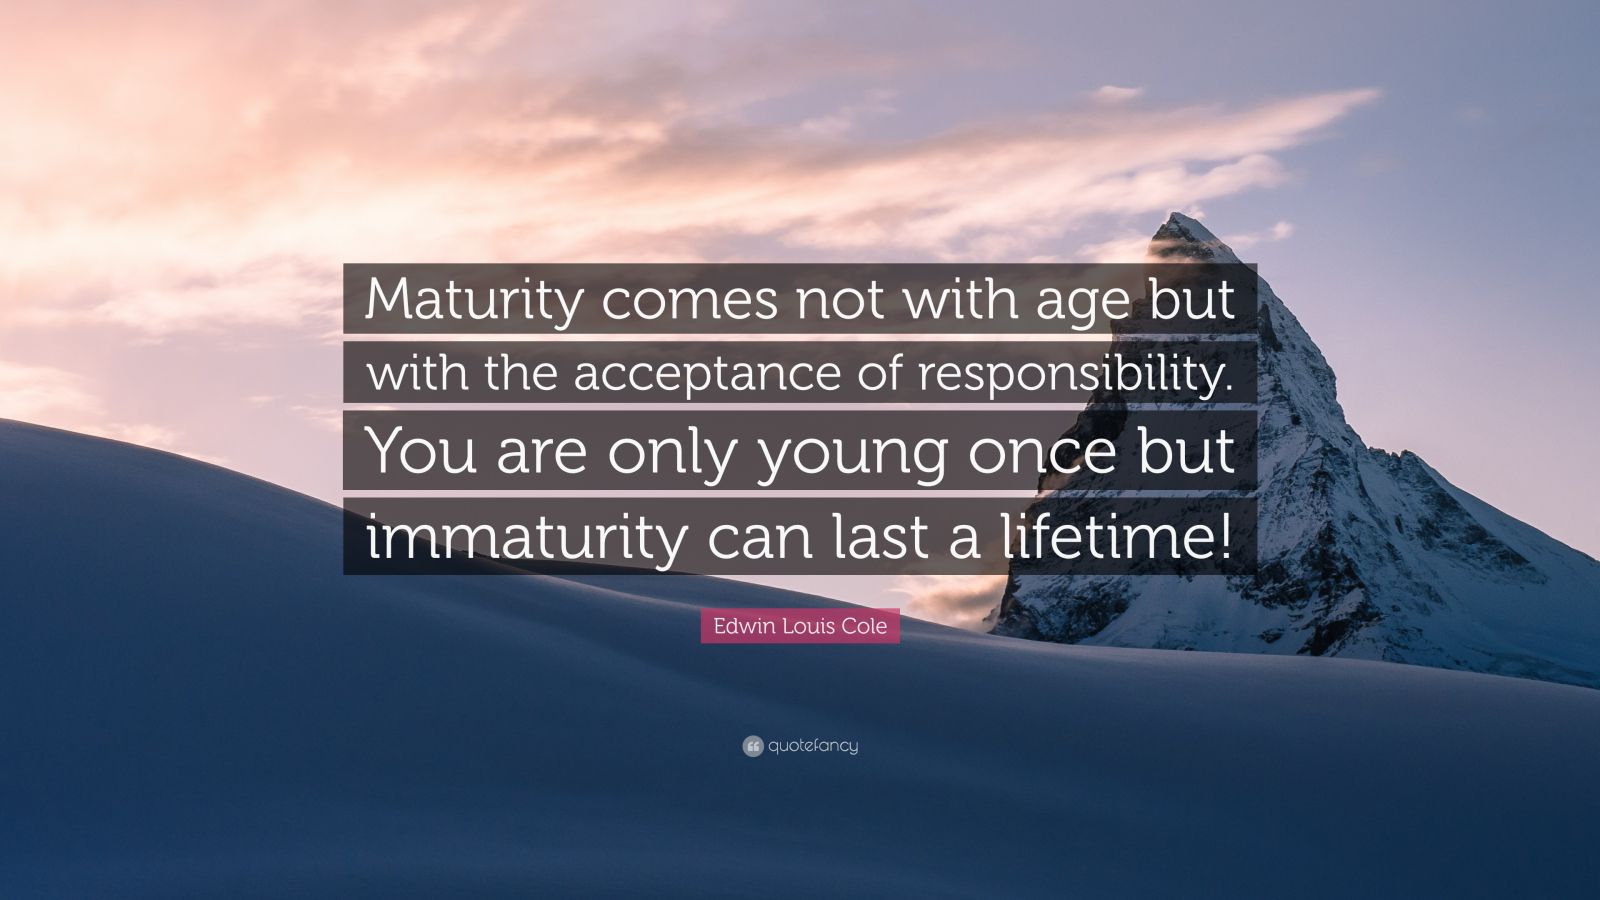 Edwin Louis Cole Quote “Maturity comes not with age but